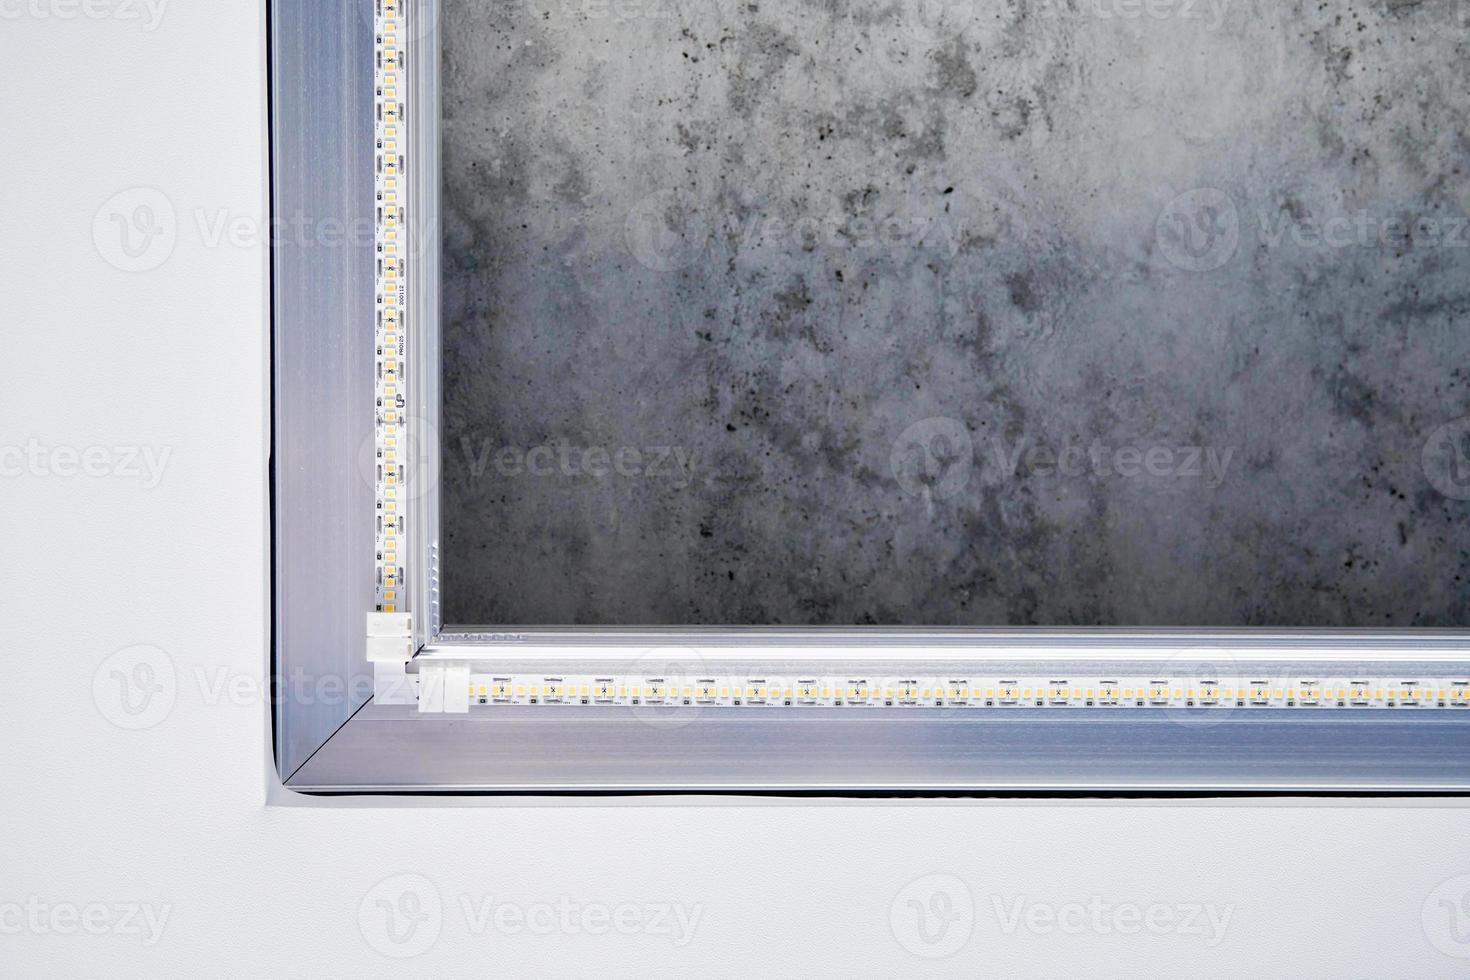 Strip LED light with square aluminum profile on stretch ceiling, close up. Home renovation concept photo